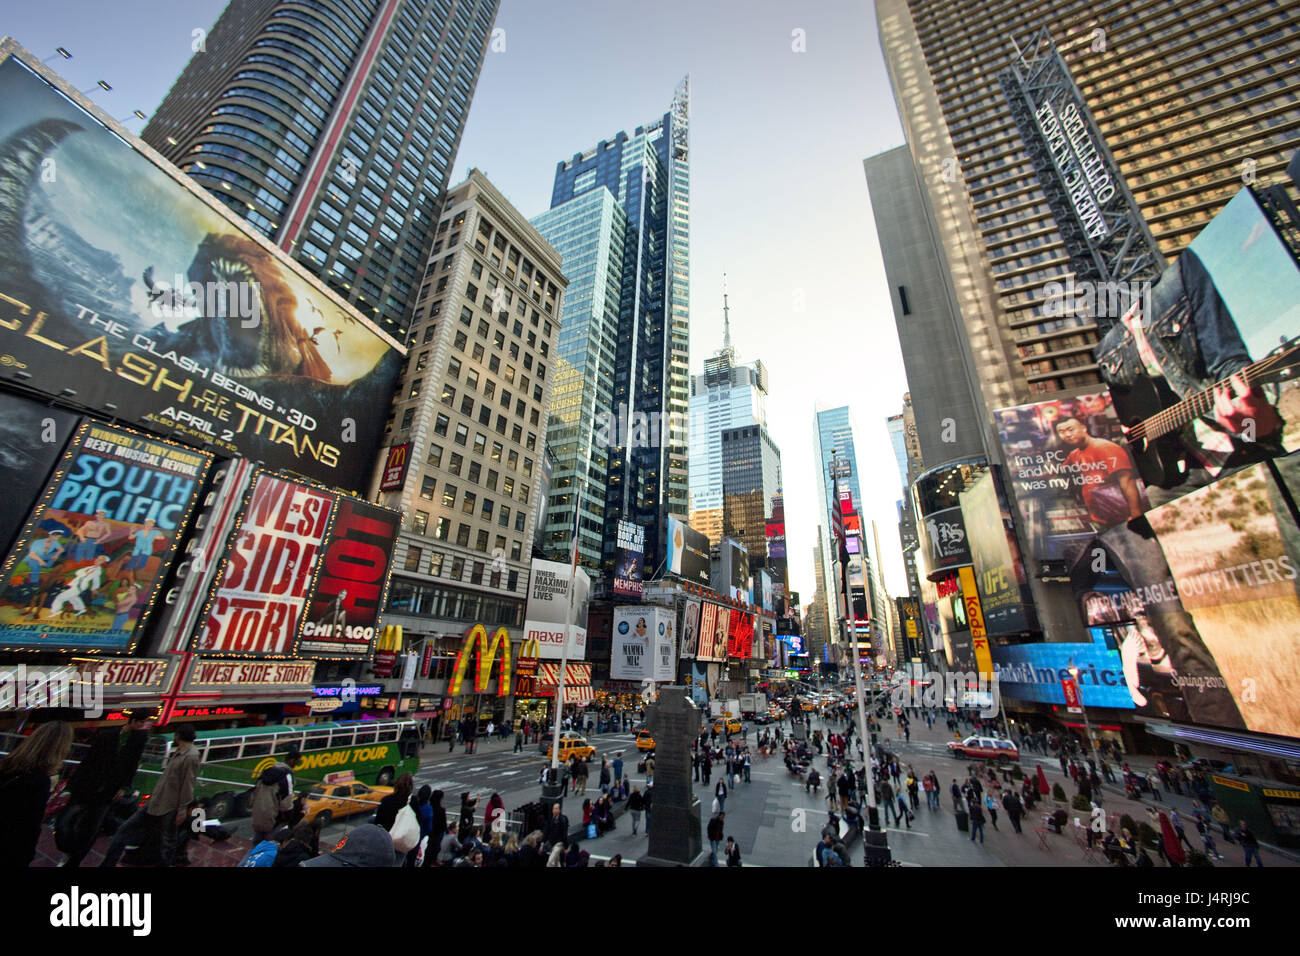 The USA, New York city, Times Square, Broadway, Stock Photo